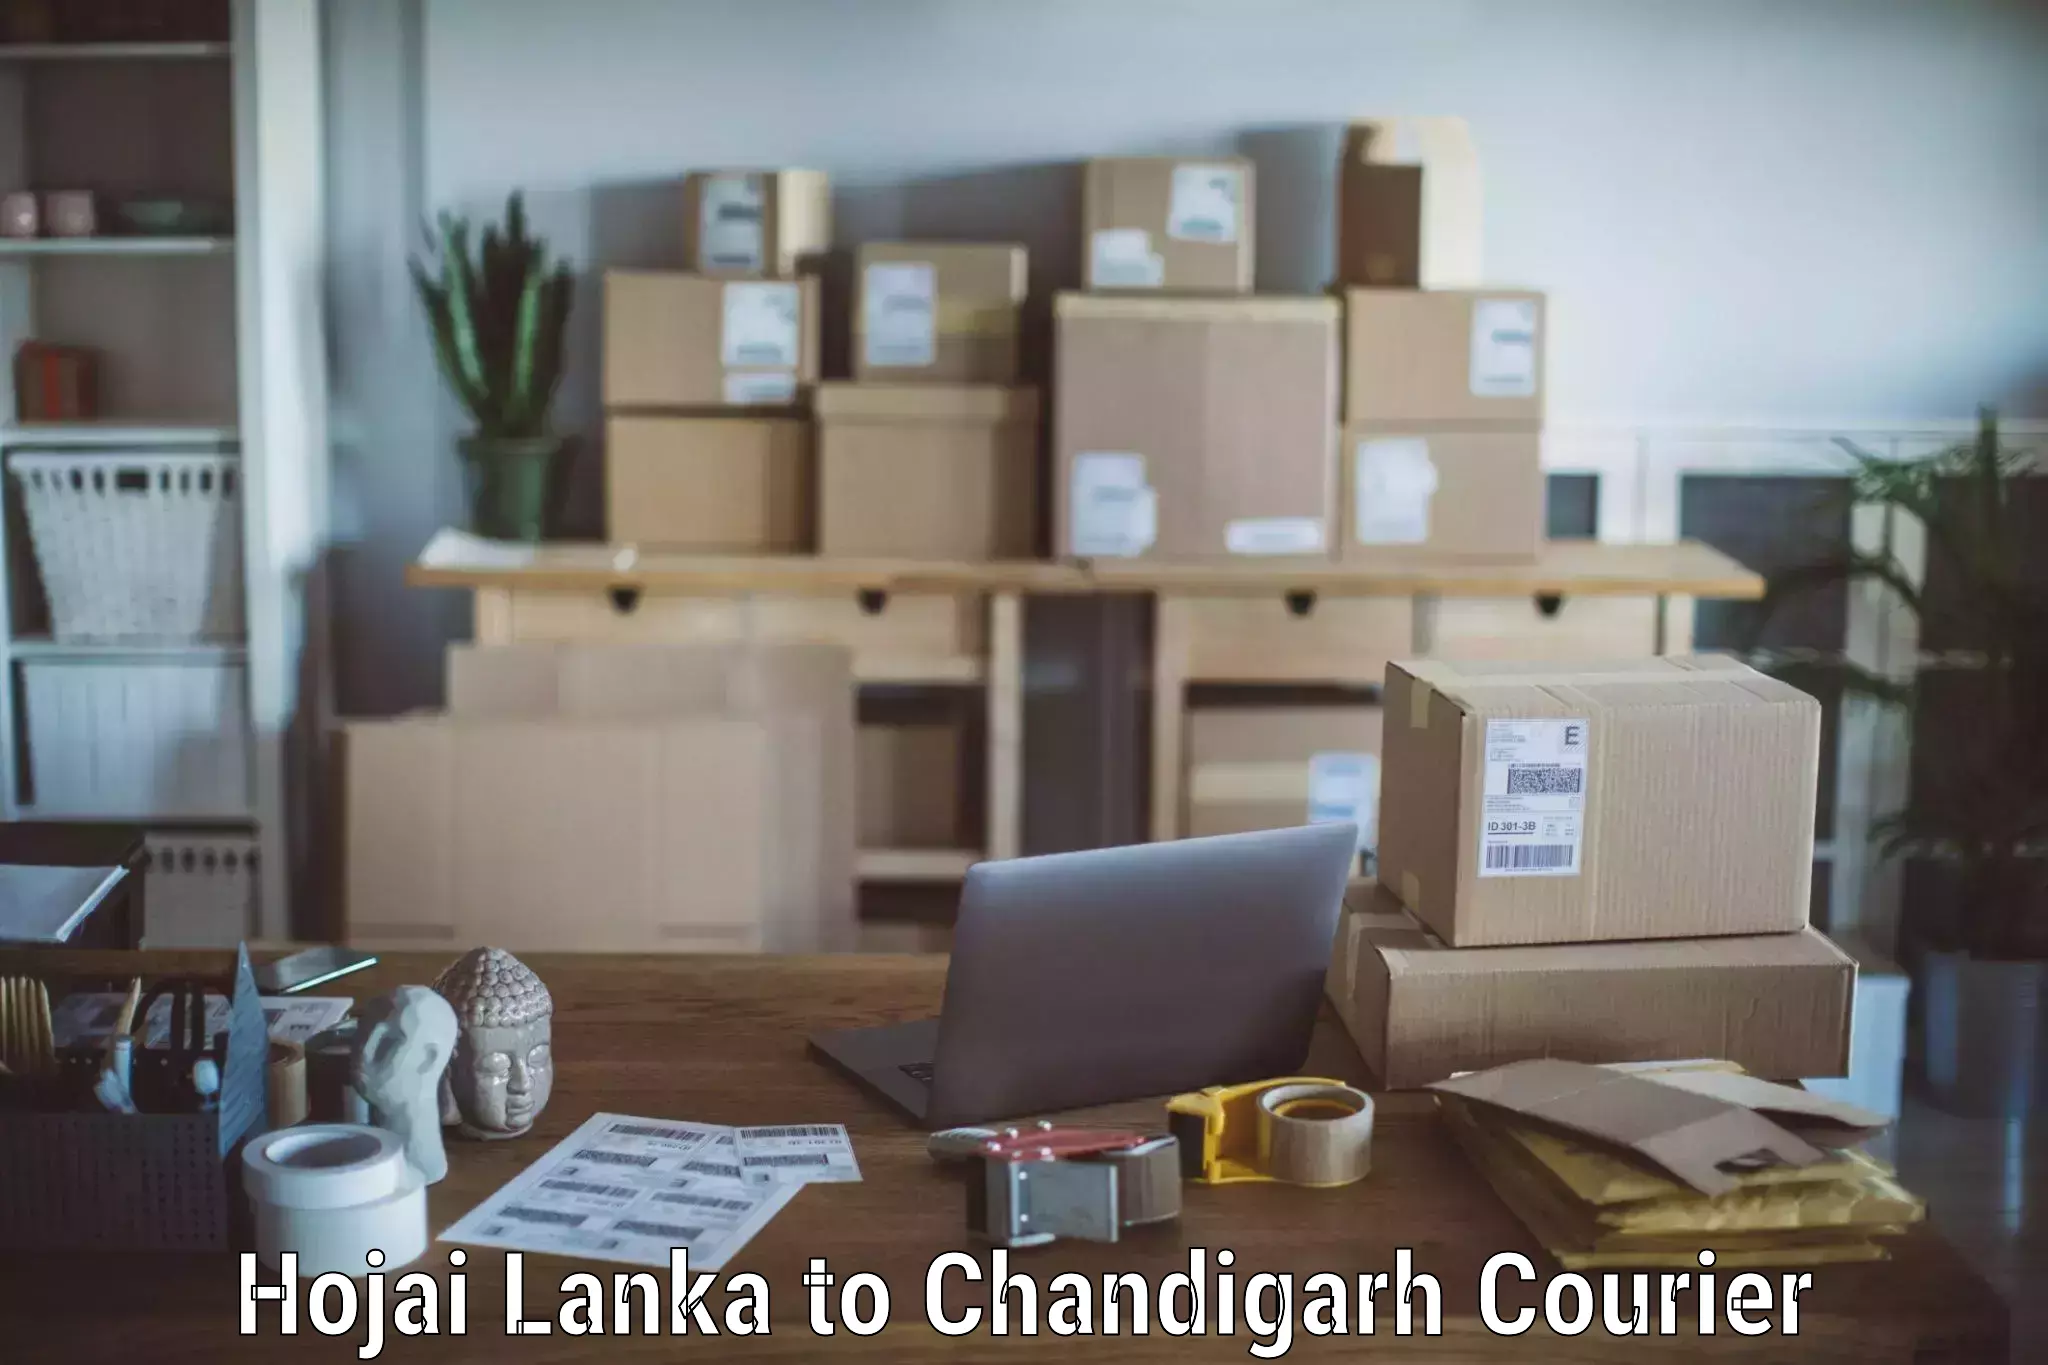 Quality relocation assistance Hojai Lanka to Chandigarh